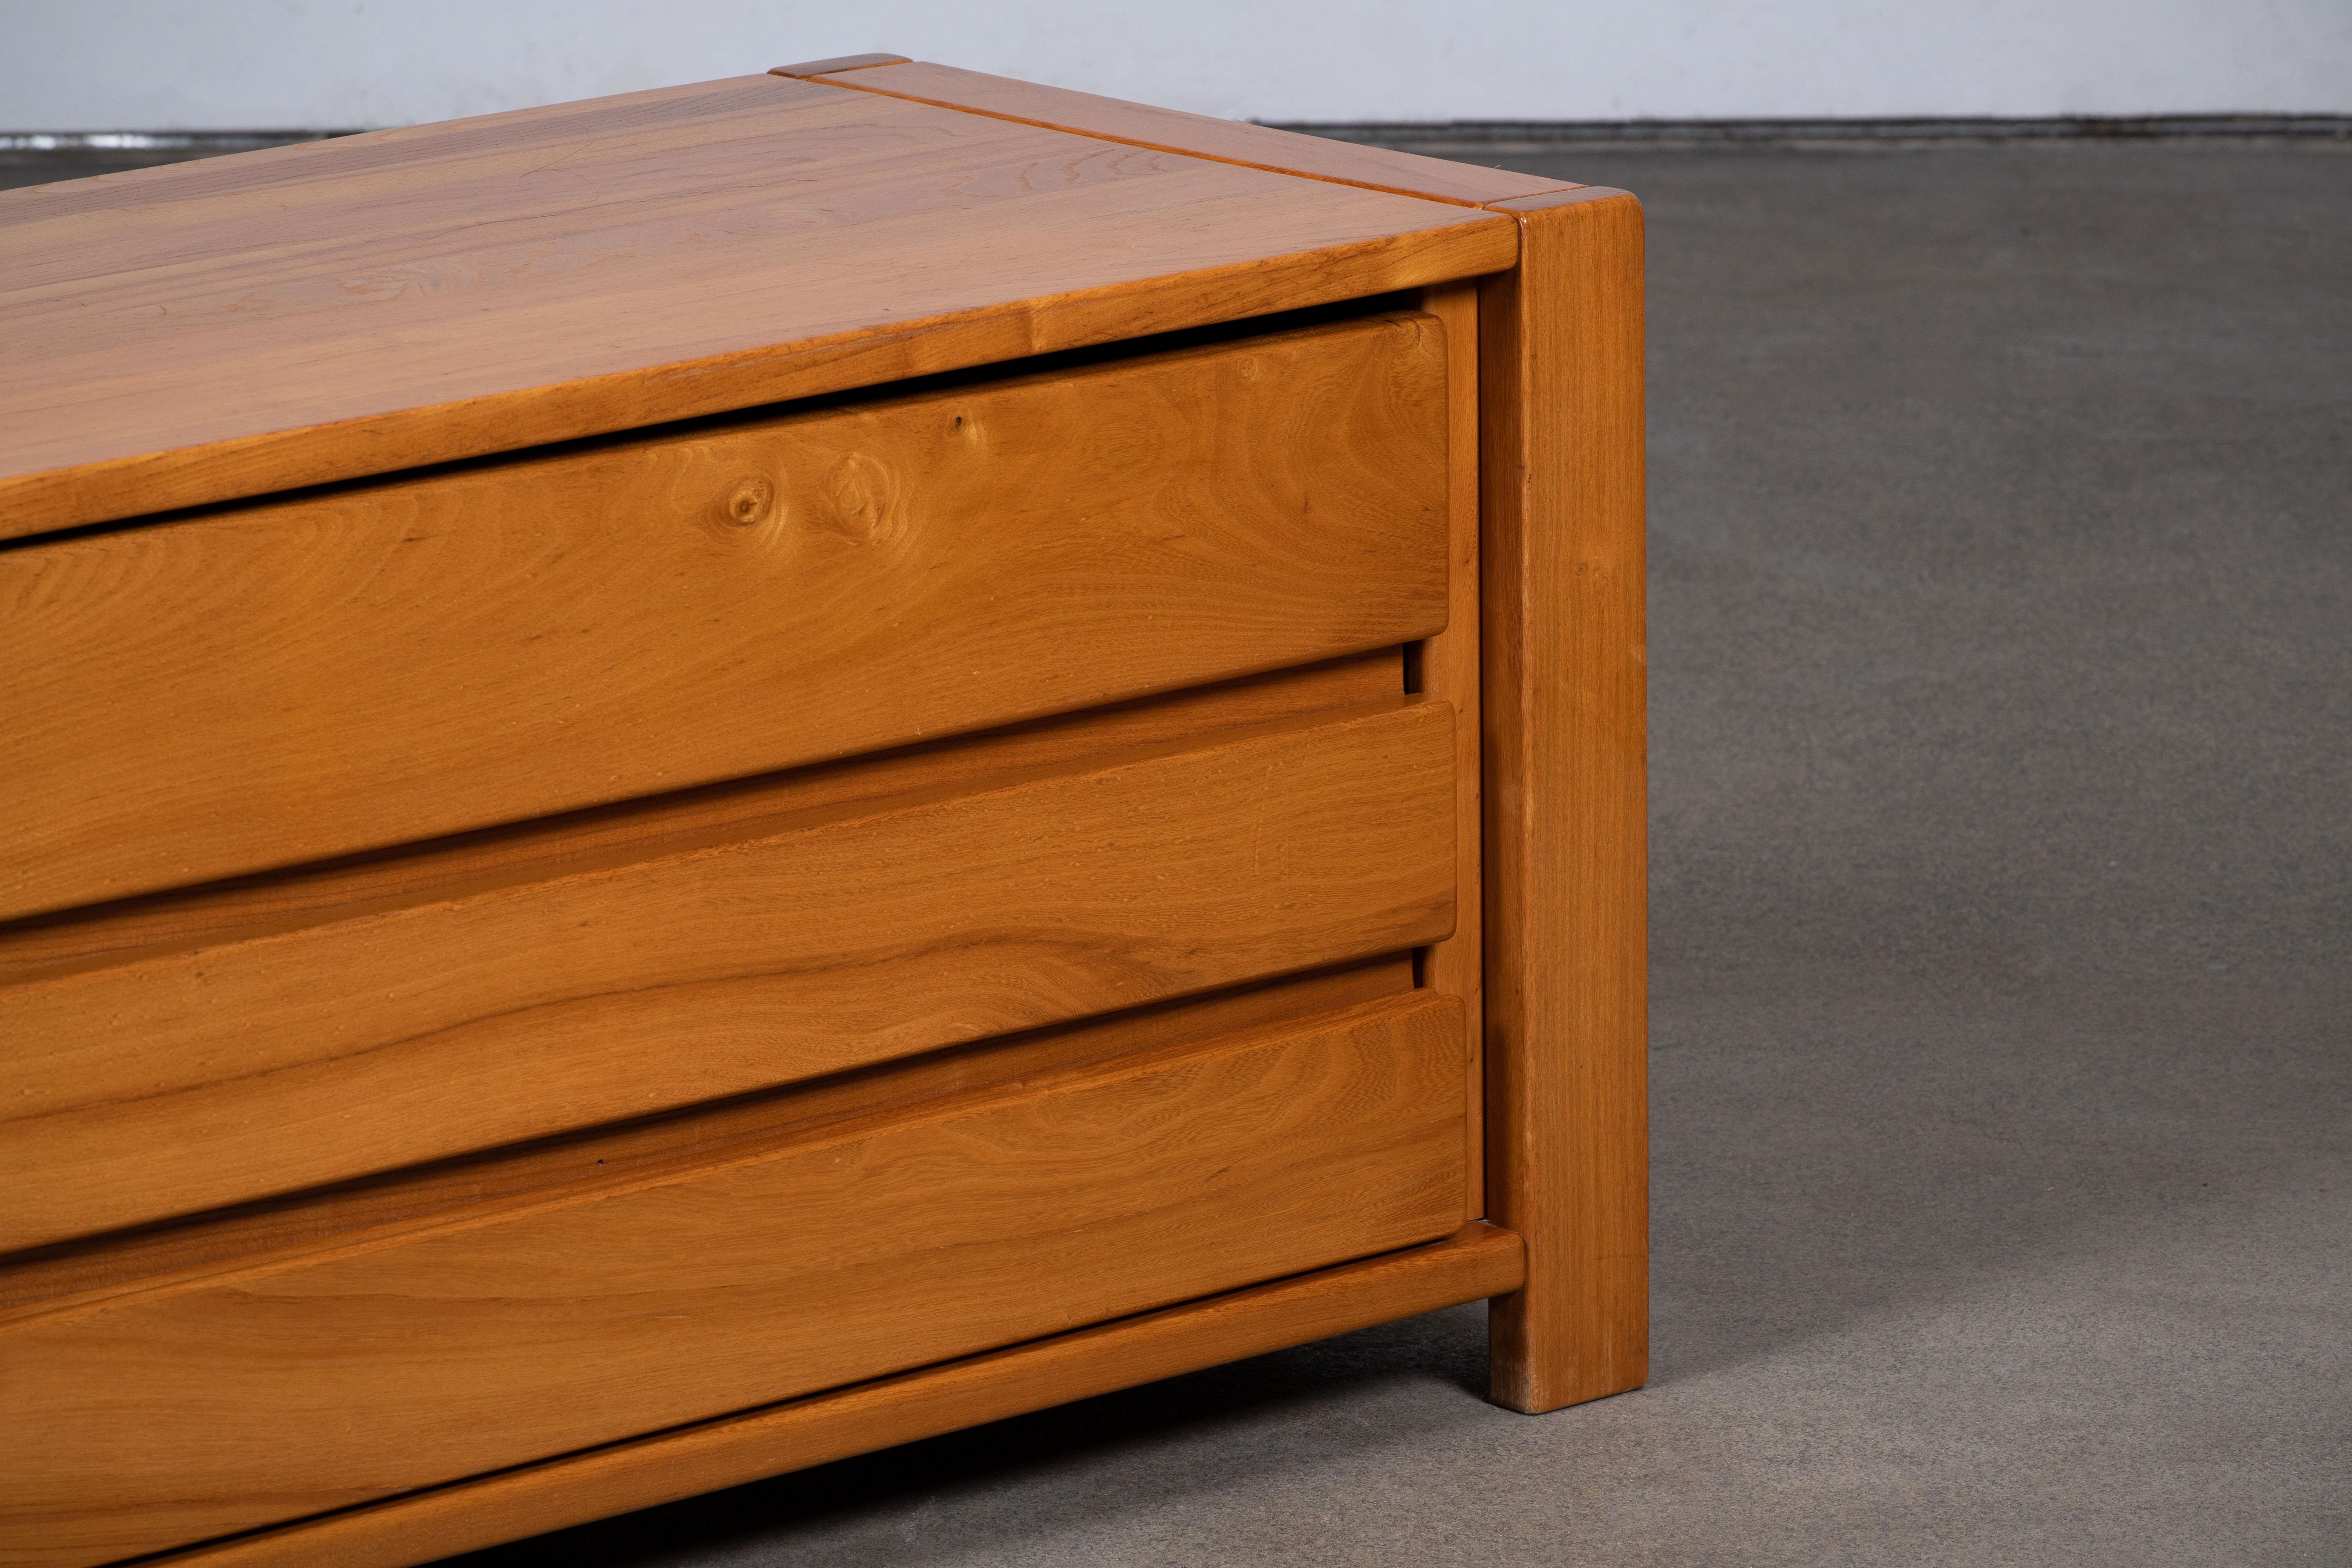 Chapo Insp Sideboard in Solid Elm, France, 1970s In Good Condition For Sale In Wiesbaden, DE